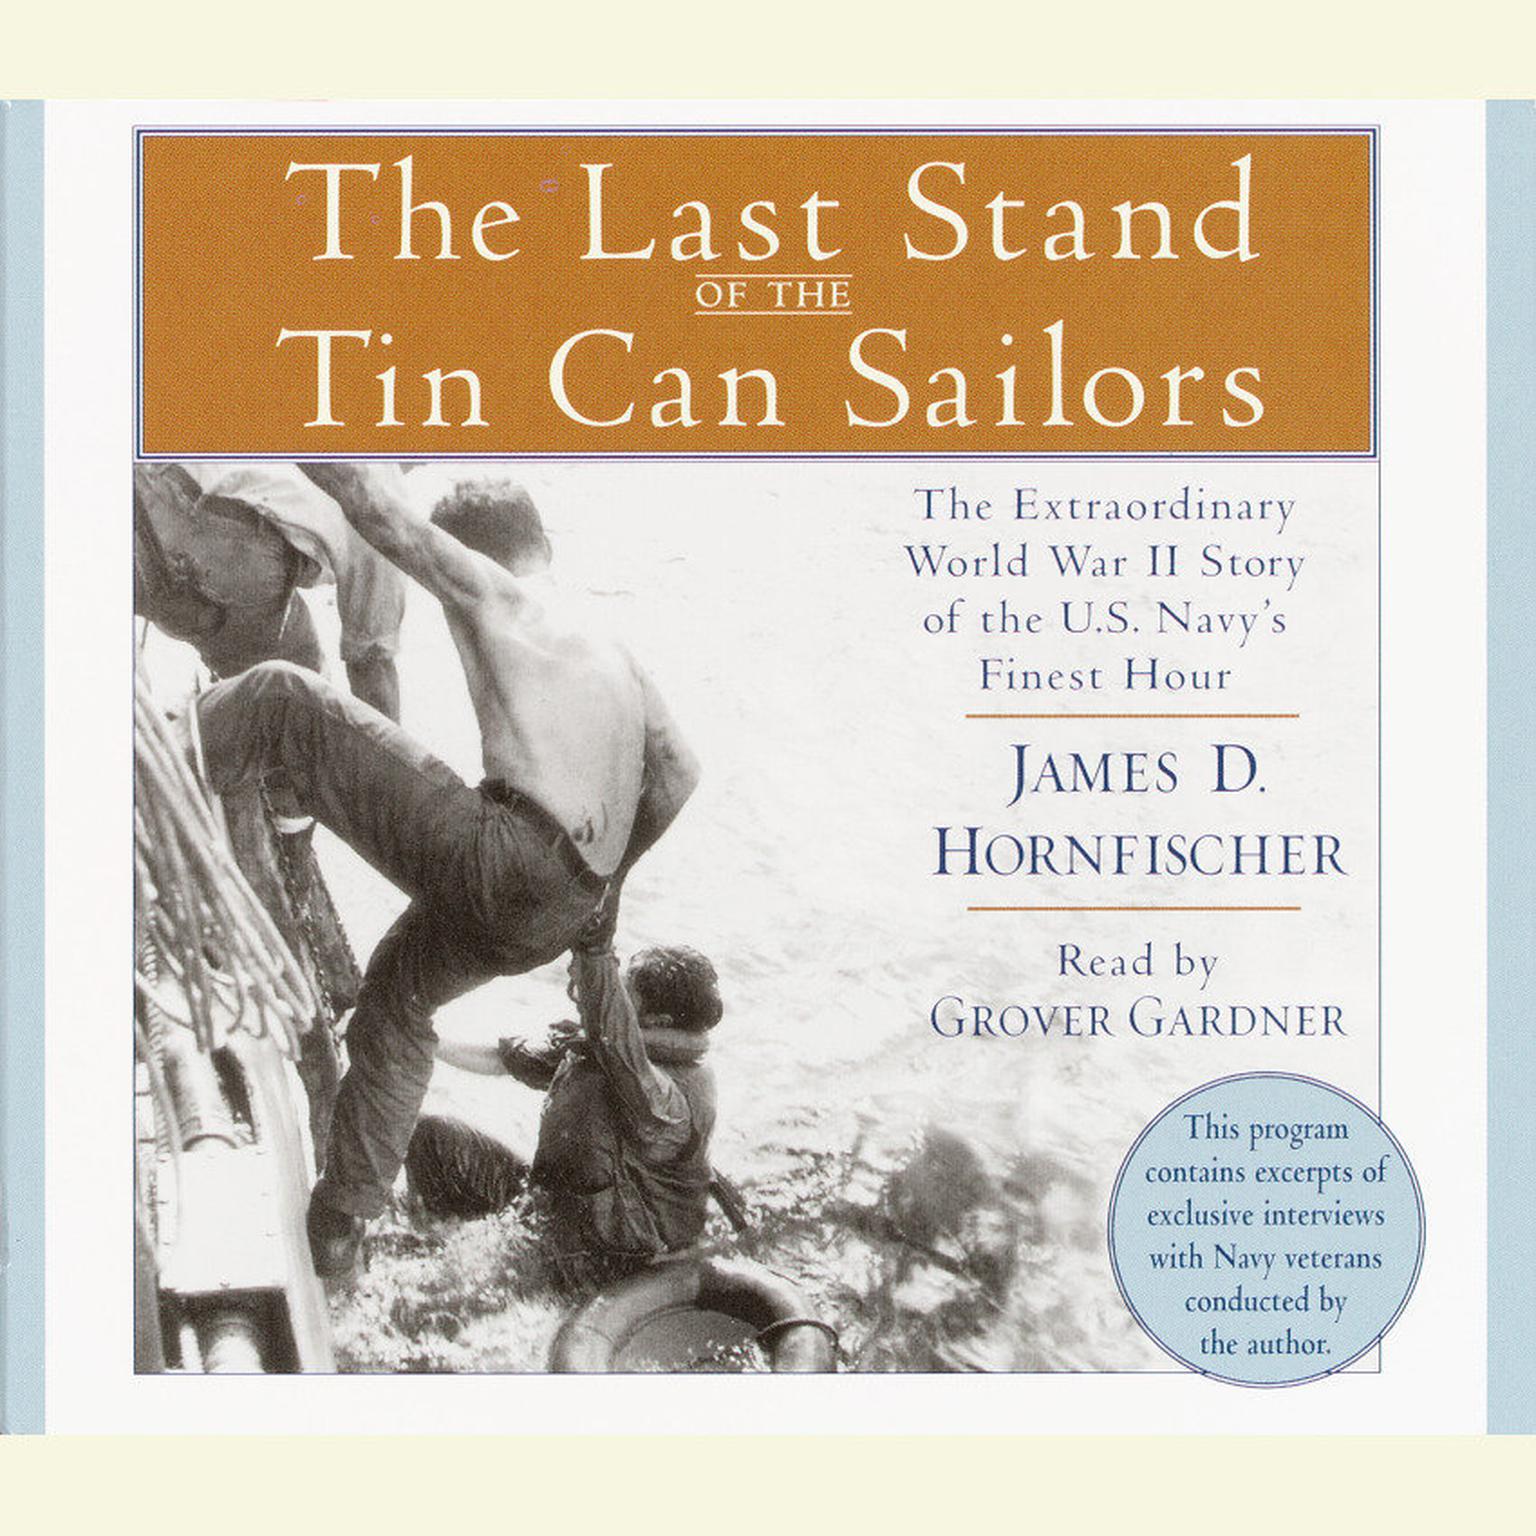 The Last Stand of the Tin Can Sailors (Abridged): The Extraordinary World War II Story of the U.S. Navys Finest Hour Audiobook, by James D. Hornfischer